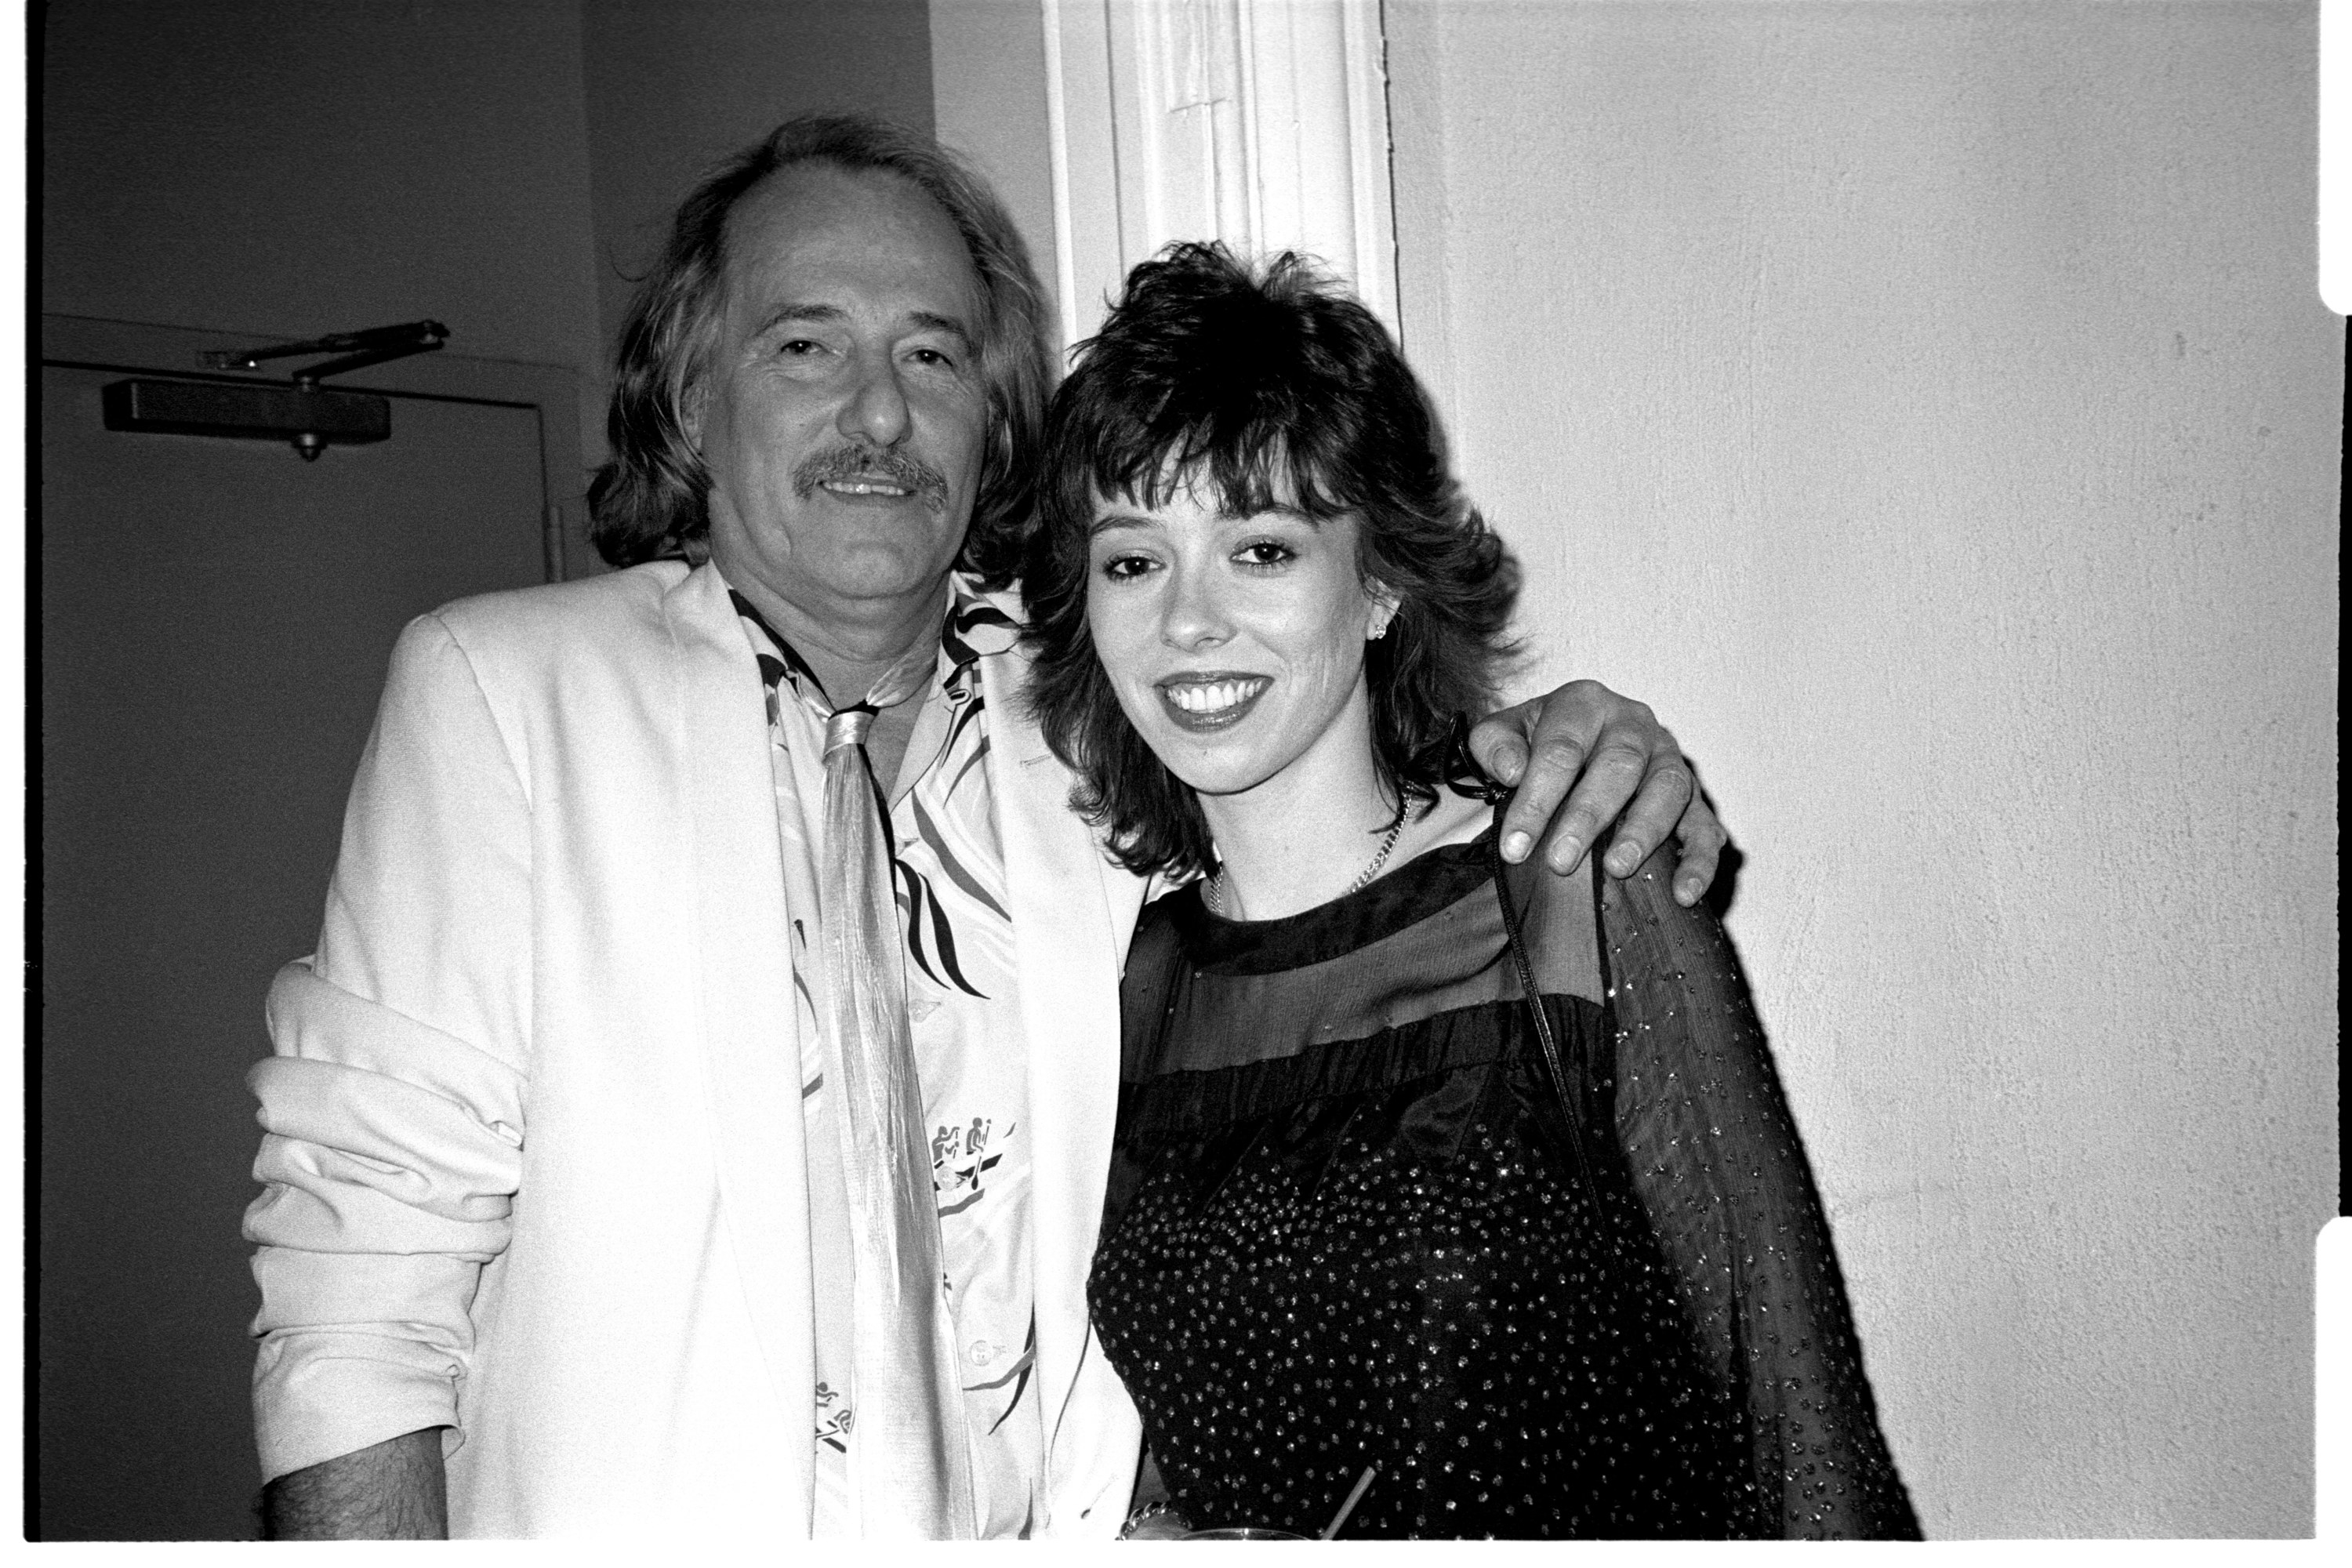 John and Mackenzie Phillips at the Mackenzie Phillips party at Limelight. February 1984